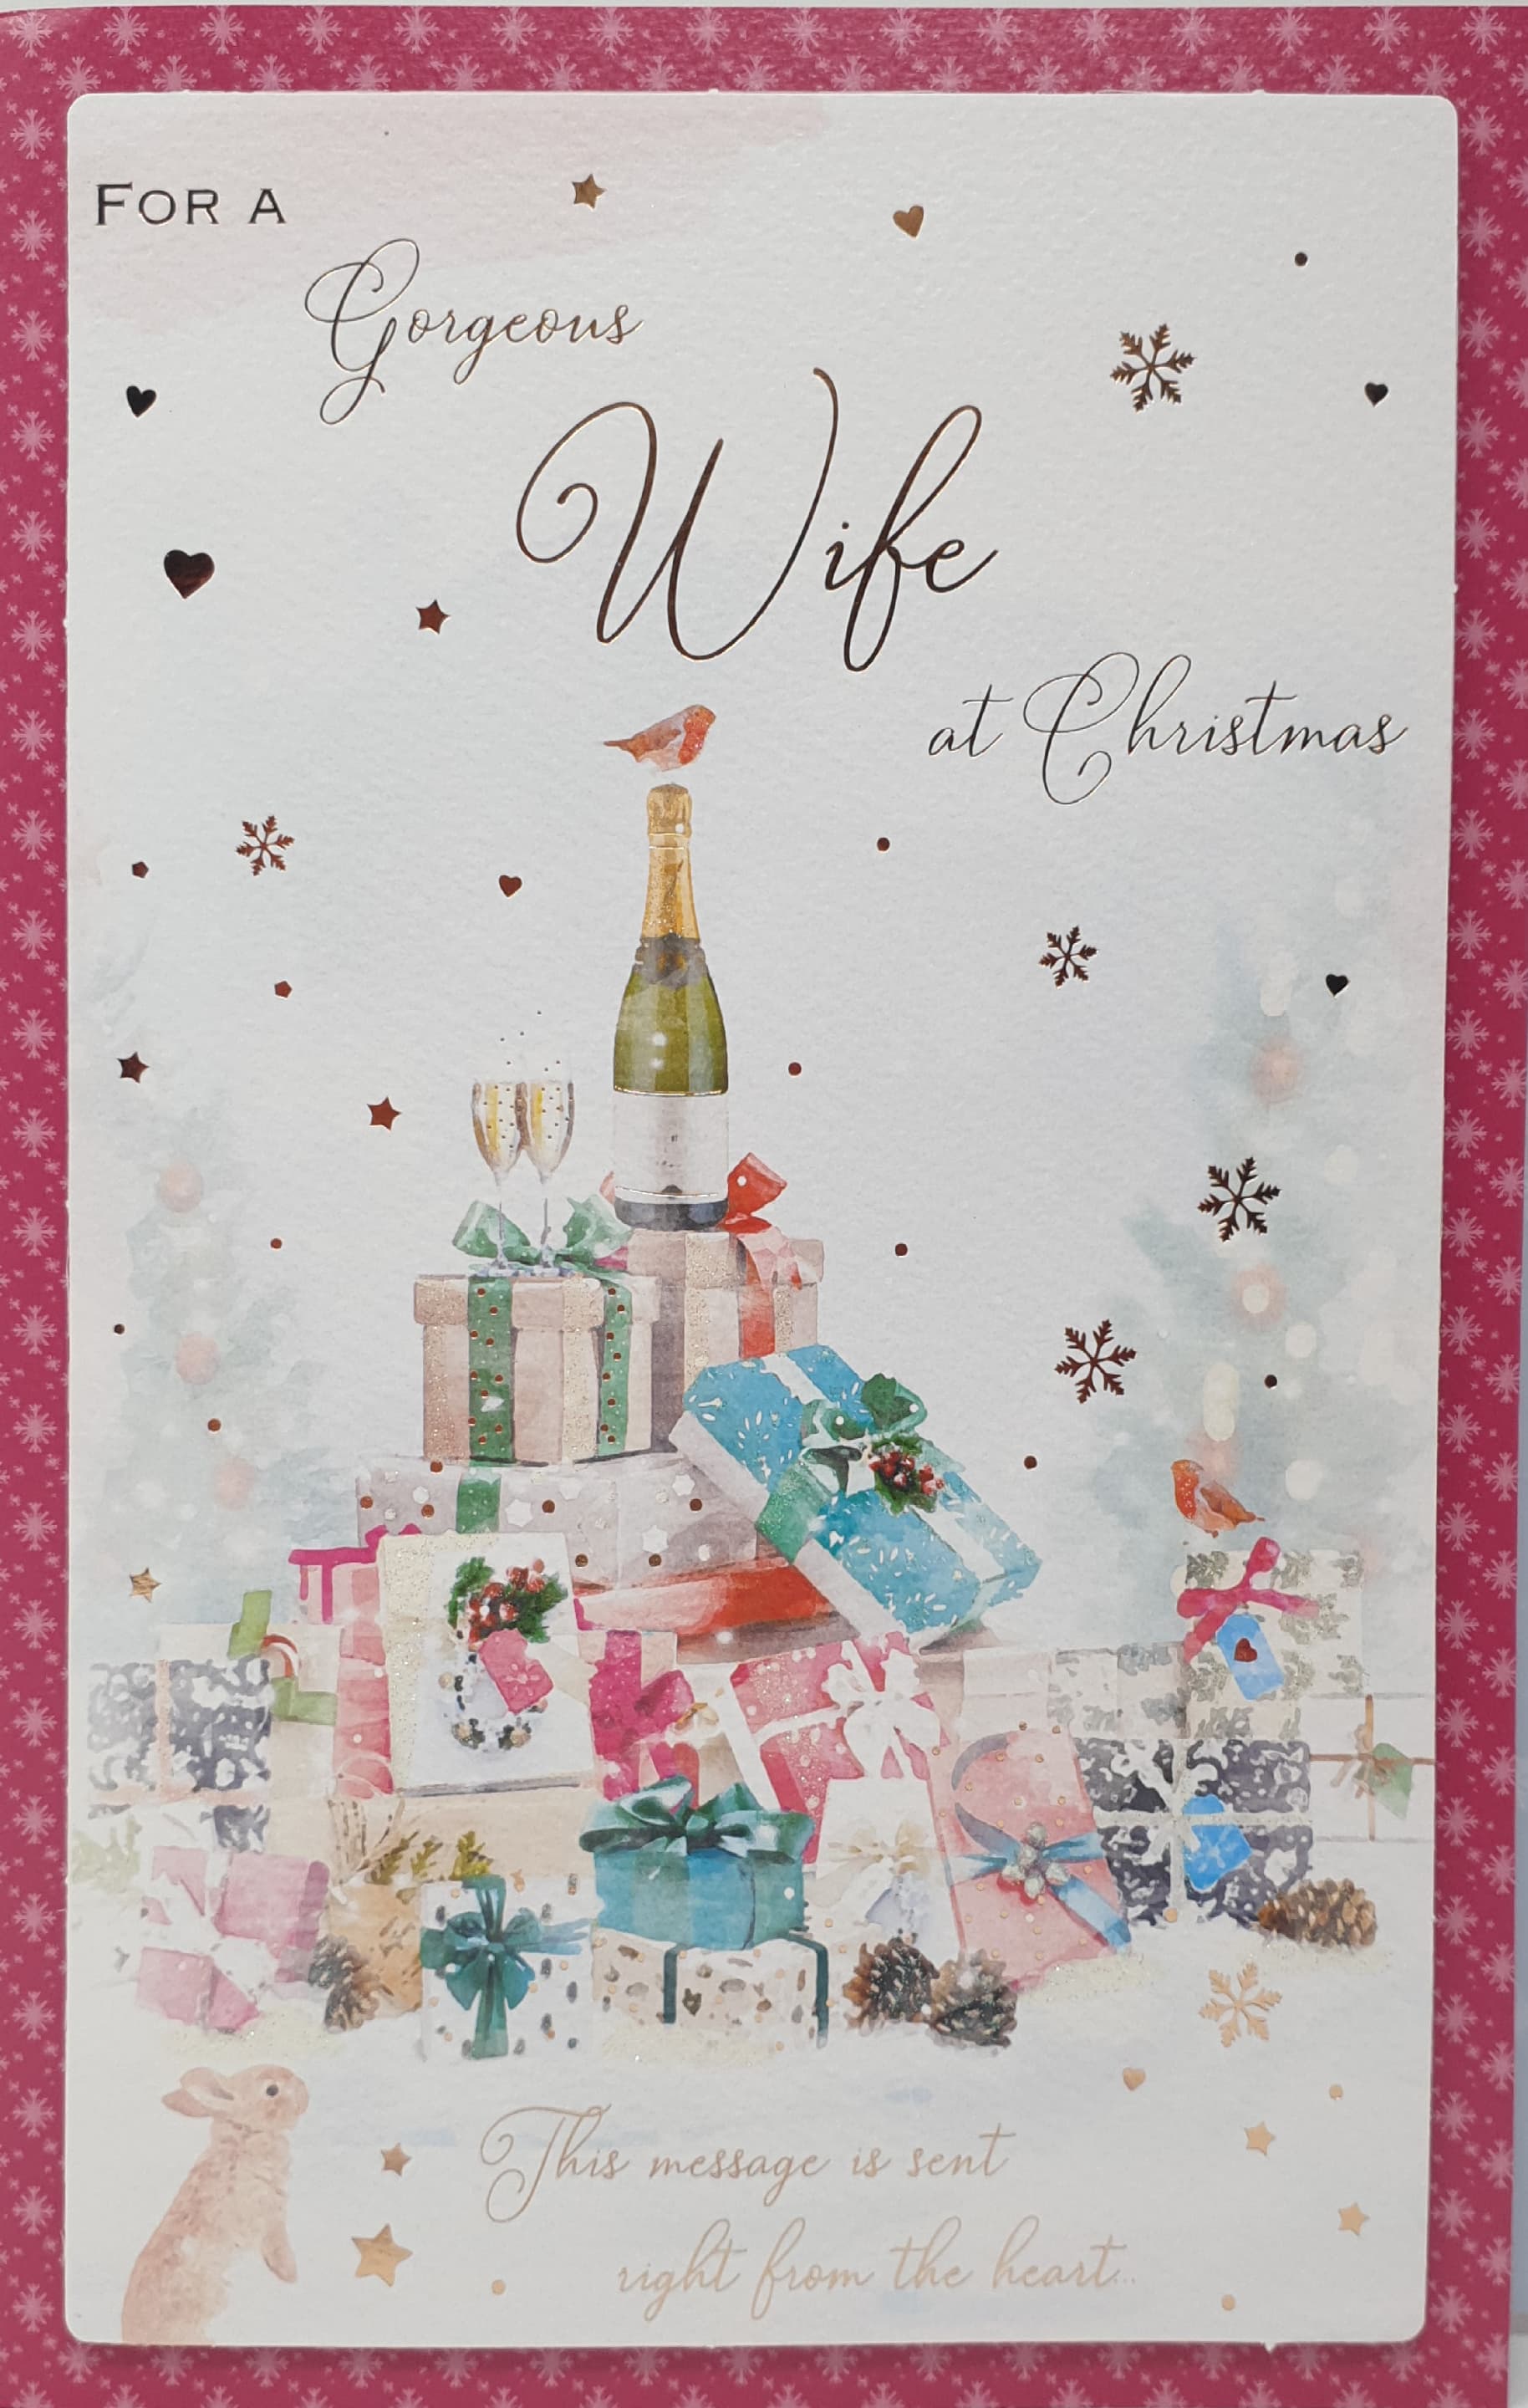 Wife Christmas Card - Decorated Pile of Gifts & Wine (Card In A Presentation Box)